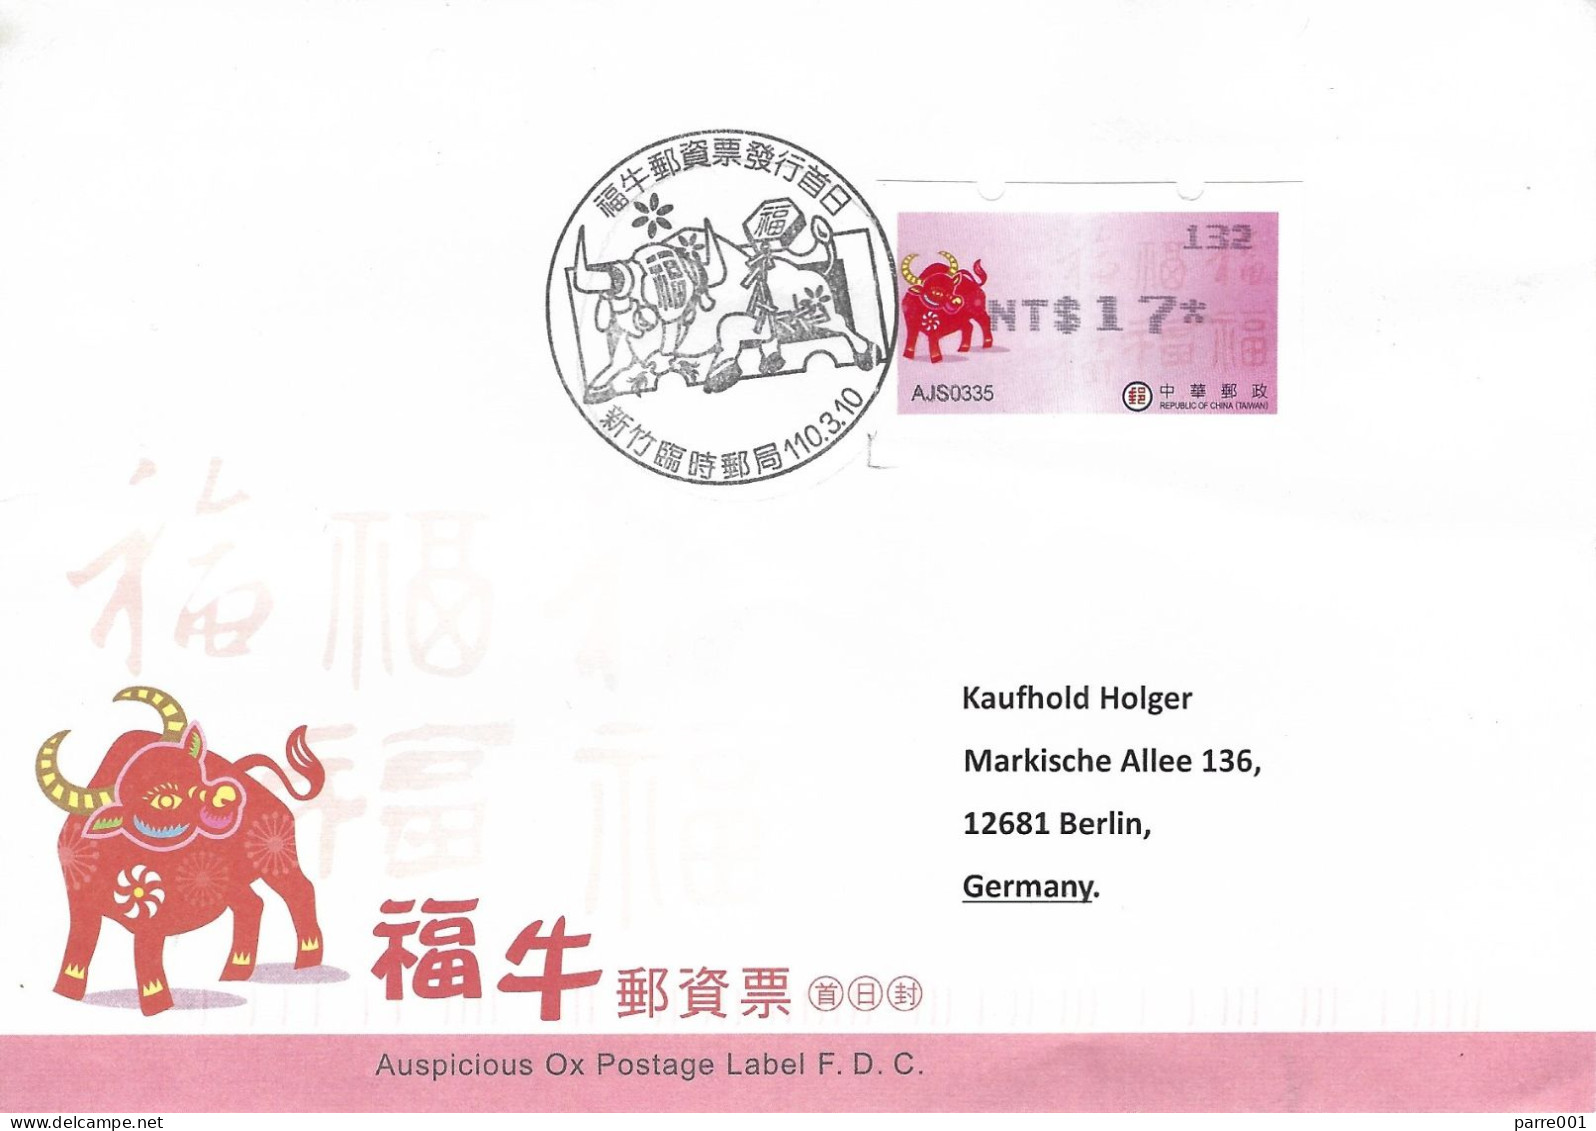 Taiwan 2021 Taipei Zodiac Oxen Chinese New Year ATM FDC Cover - Chinese New Year